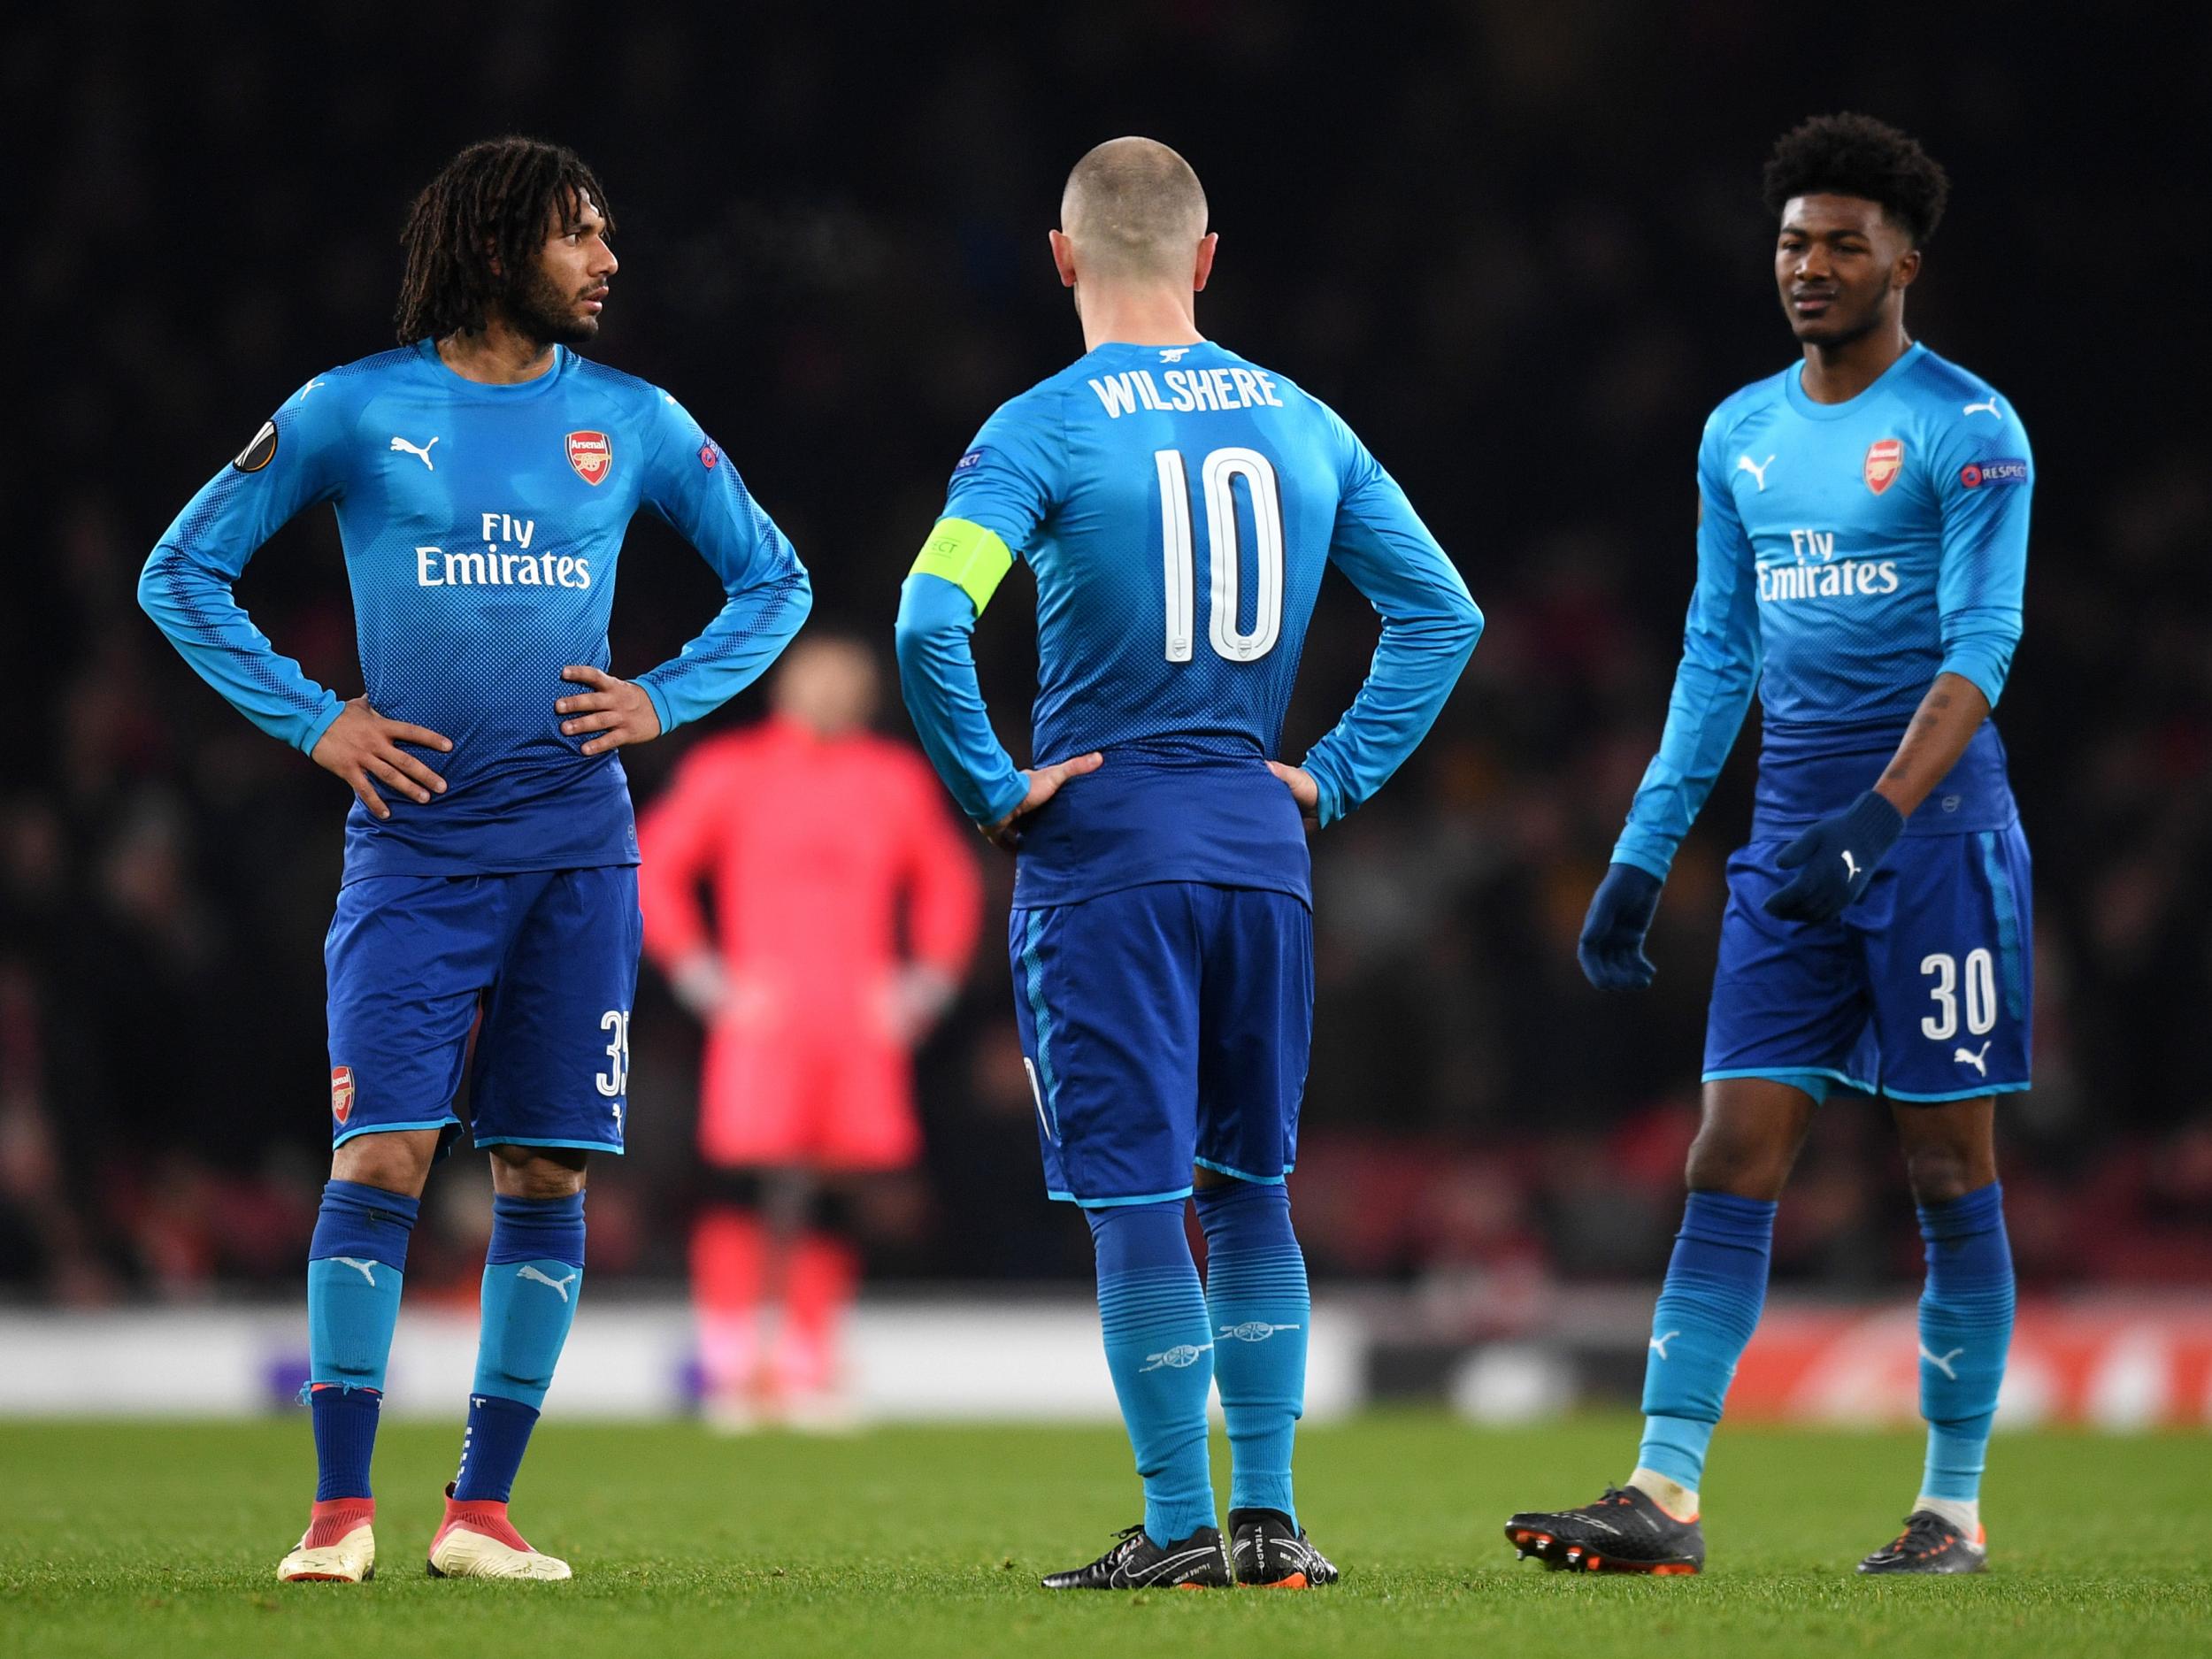 Arsenal no longer have a fleet of flourishing youngsters